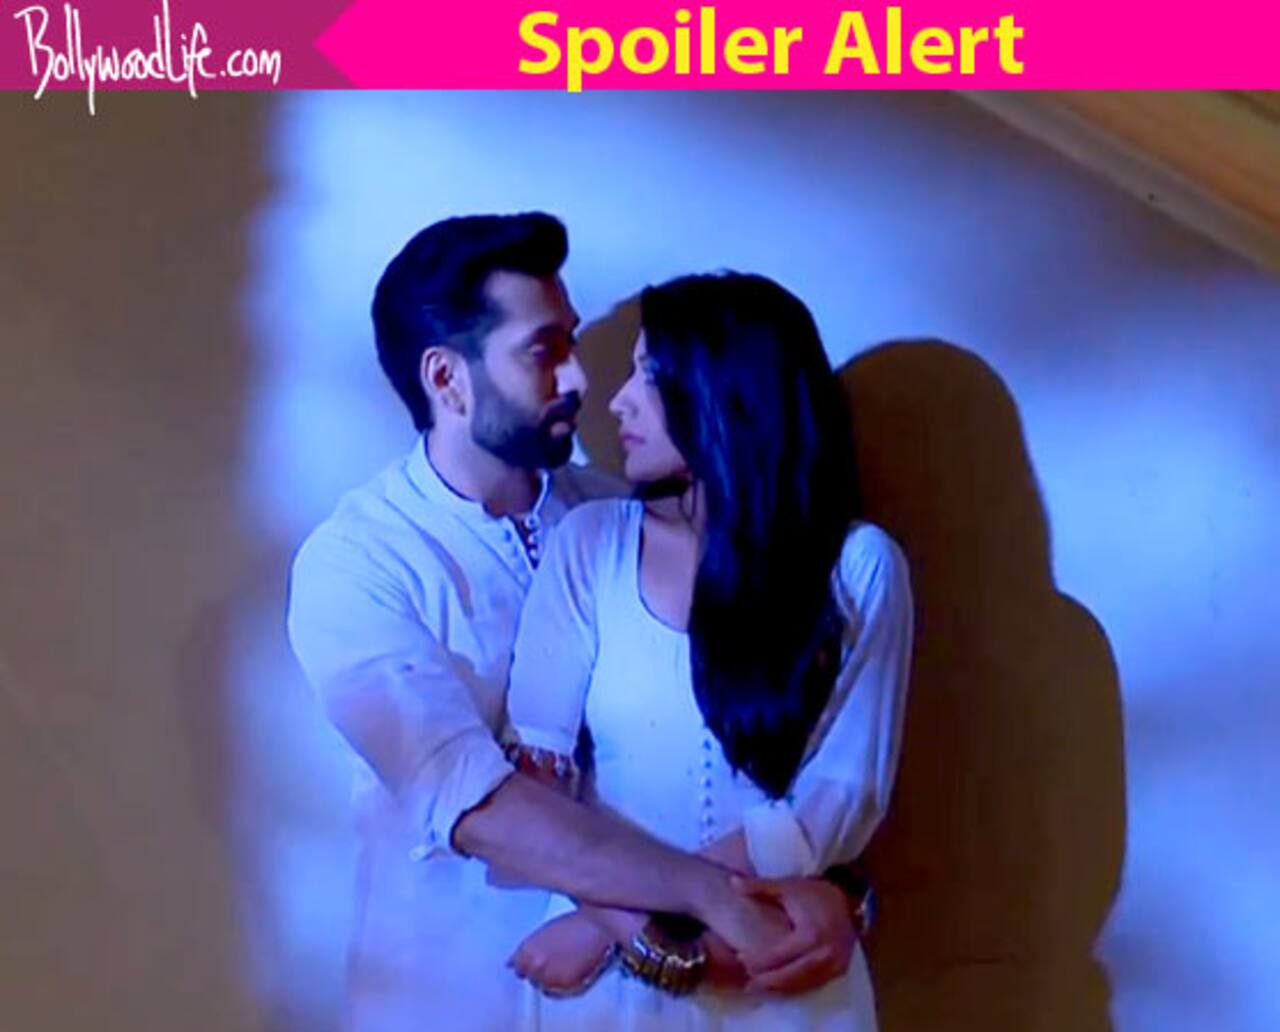 Ishqbaaz: Anika to make a master plan to avenge Sahil's insult - Bollywood  News & Gossip, Movie Reviews, Trailers & Videos at 